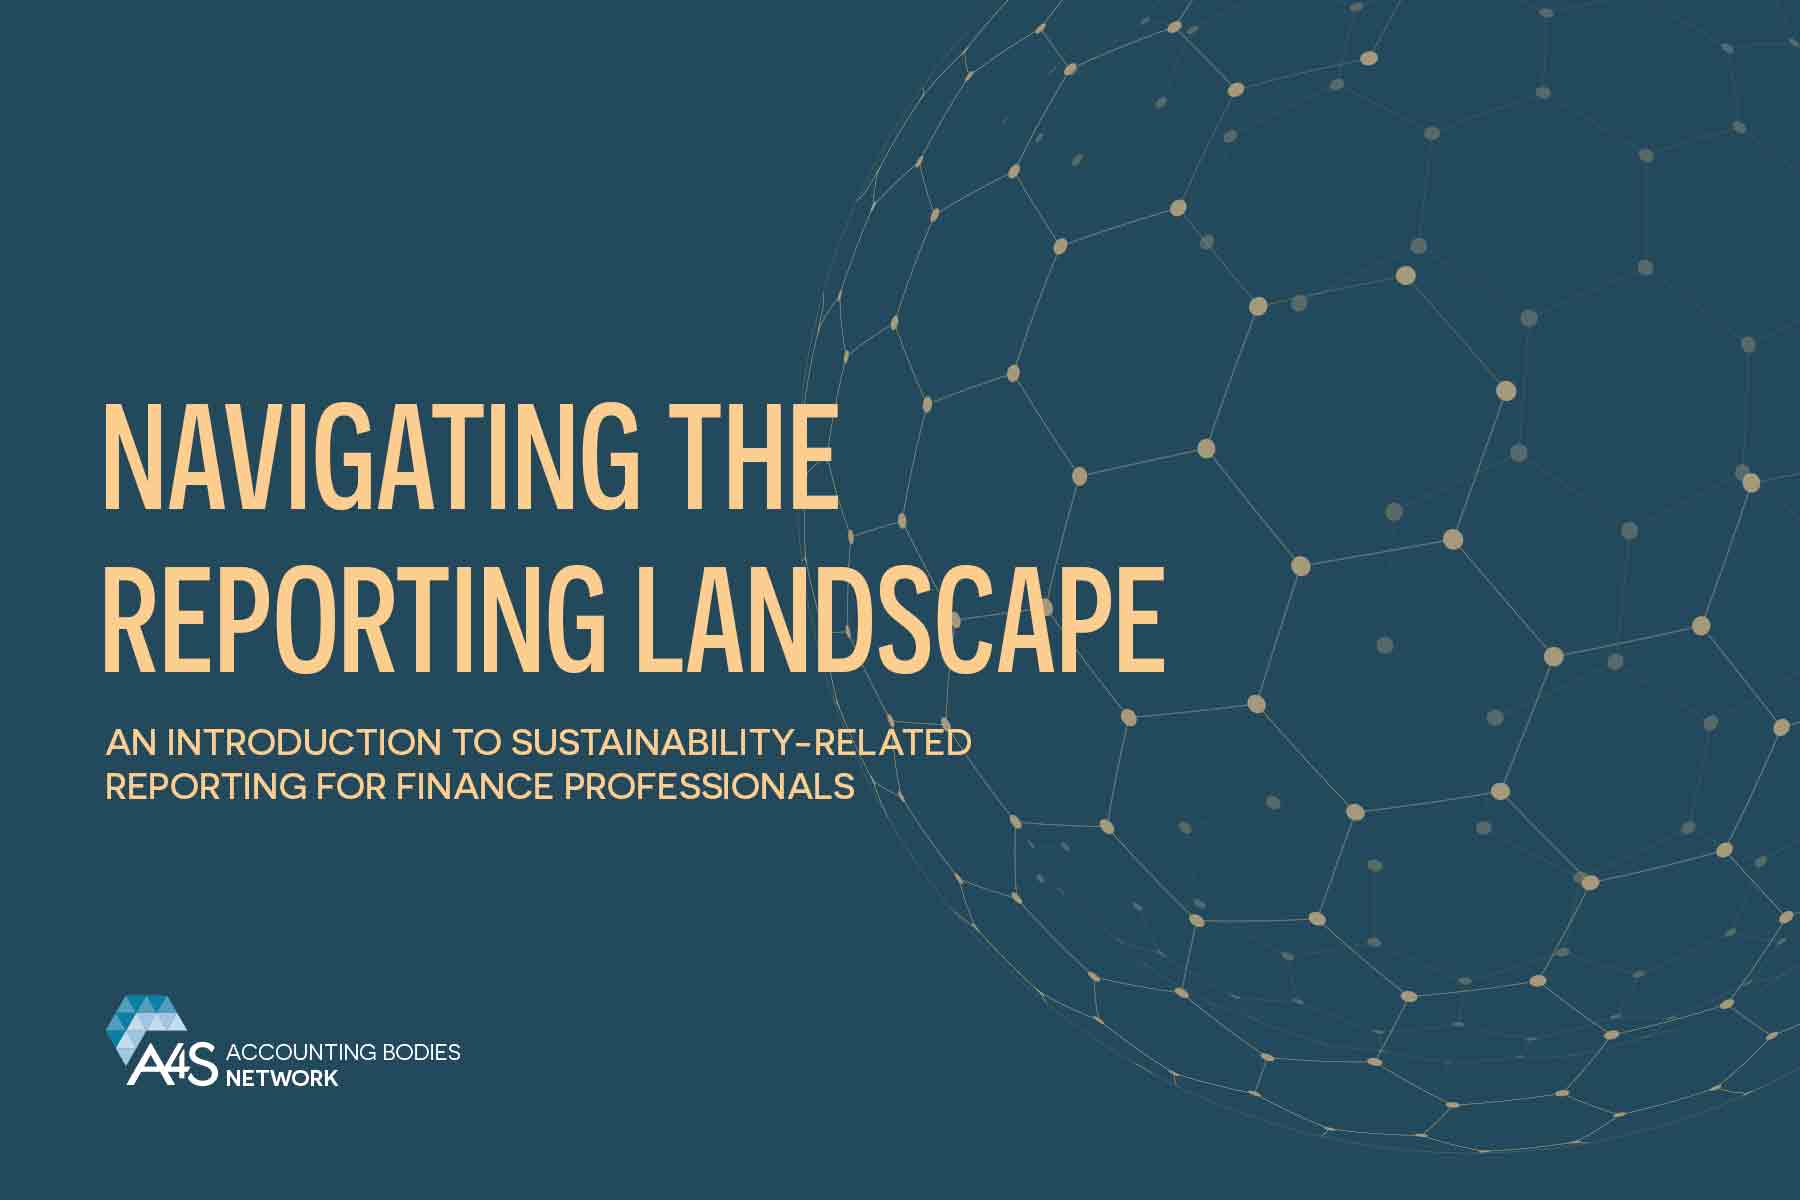 A picture of a gold hexagonal globe on a dark blue background with a gold title that reads: Navigating the Reporting Landscape: An Introduction to Sustainability-related Reporting for Finance Professionals. The A4S logo is on the bottom left.